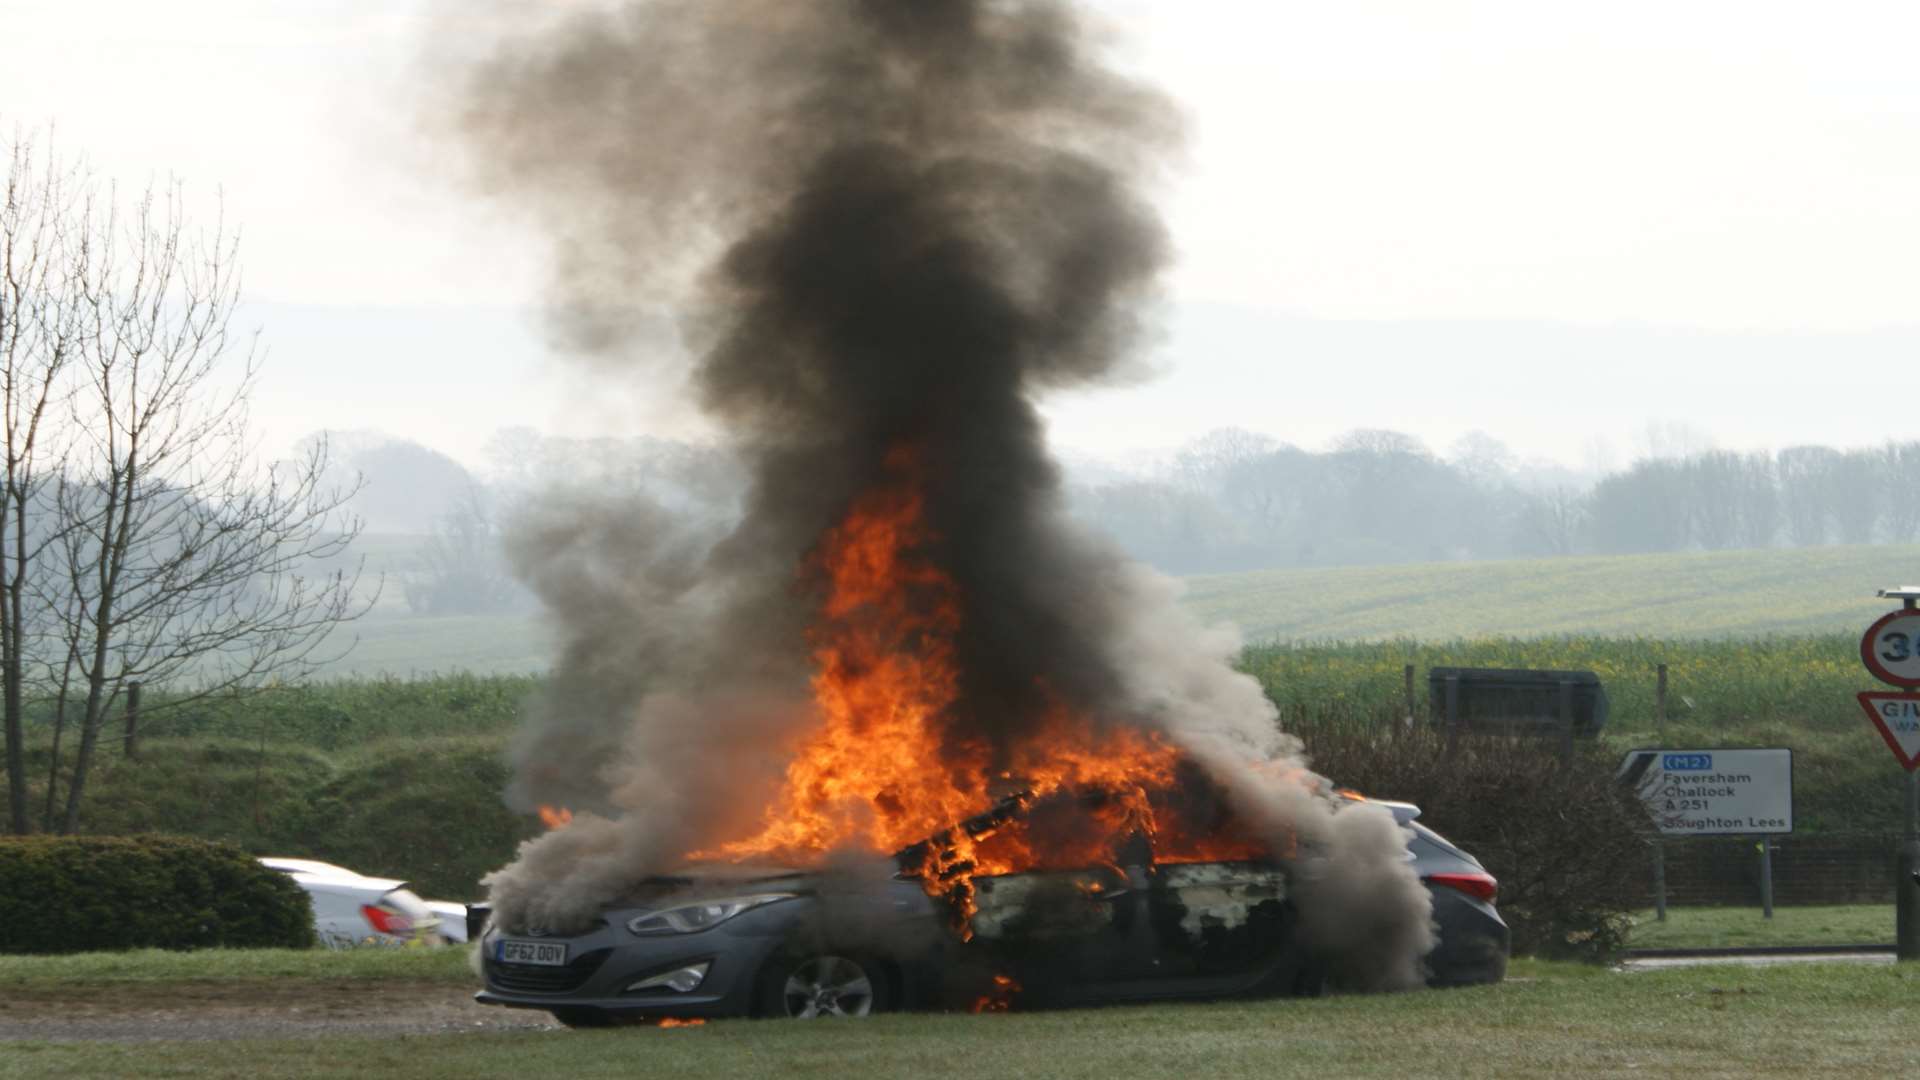 The car has been destroyed by fire. Picture: Sebastian Crowley.